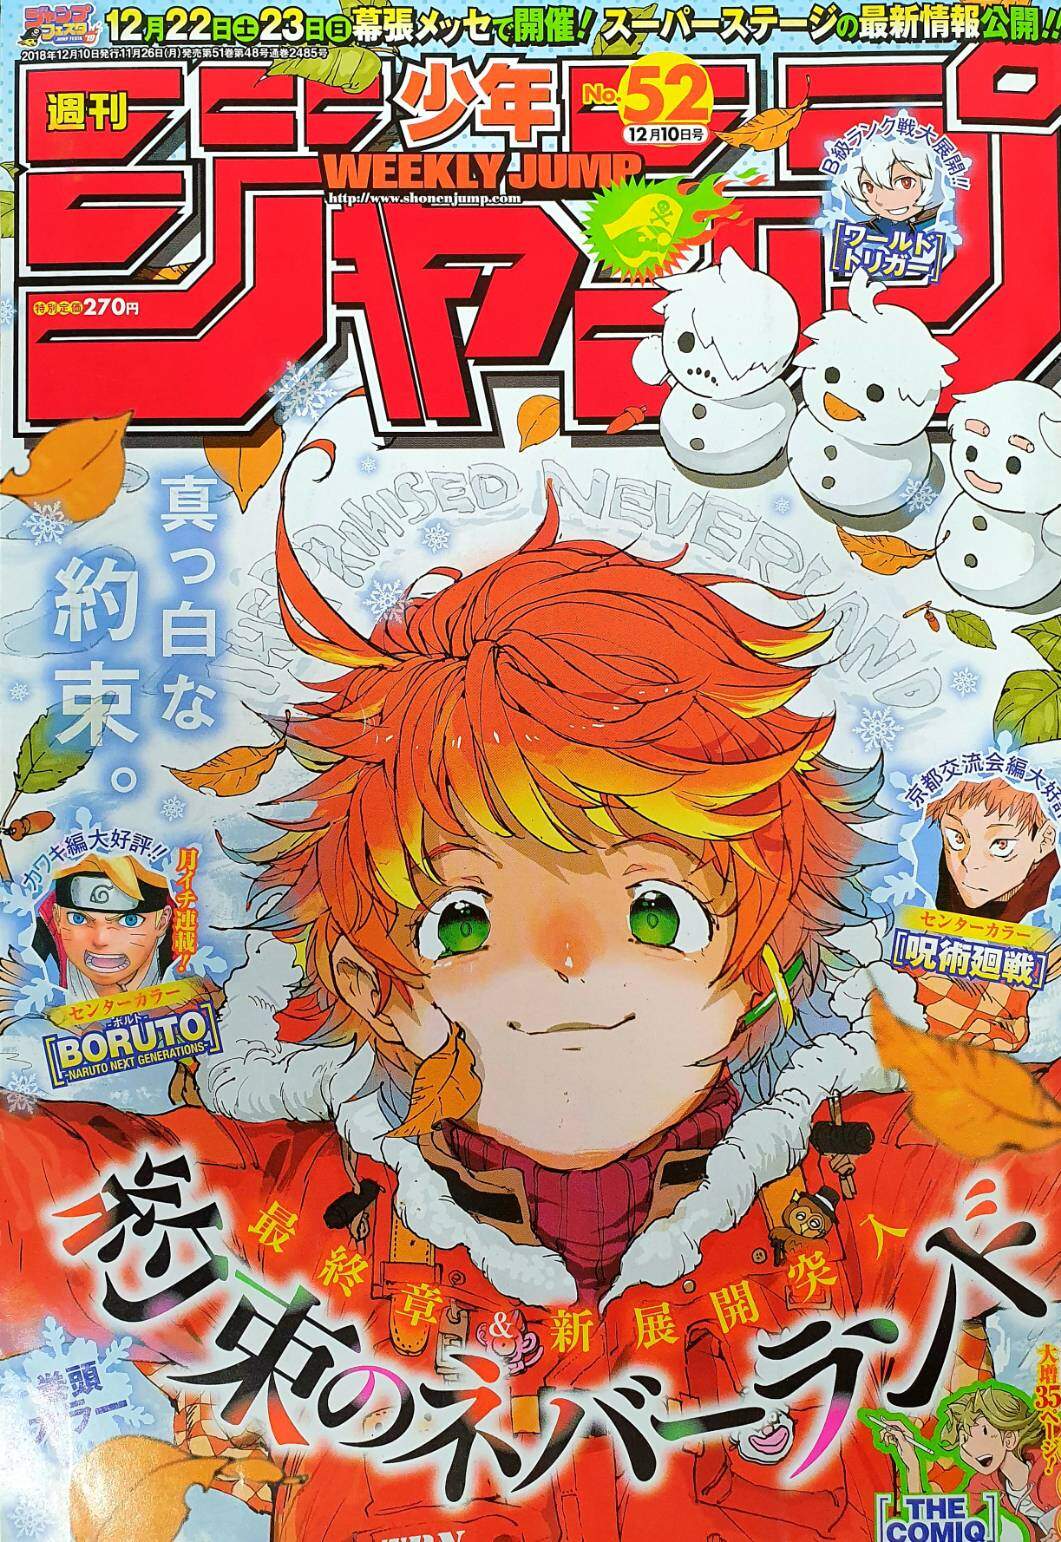 (BOOK) WEEKLY SHONEN JUMP 52/2018 (THE PROMISED NEVERLAND)